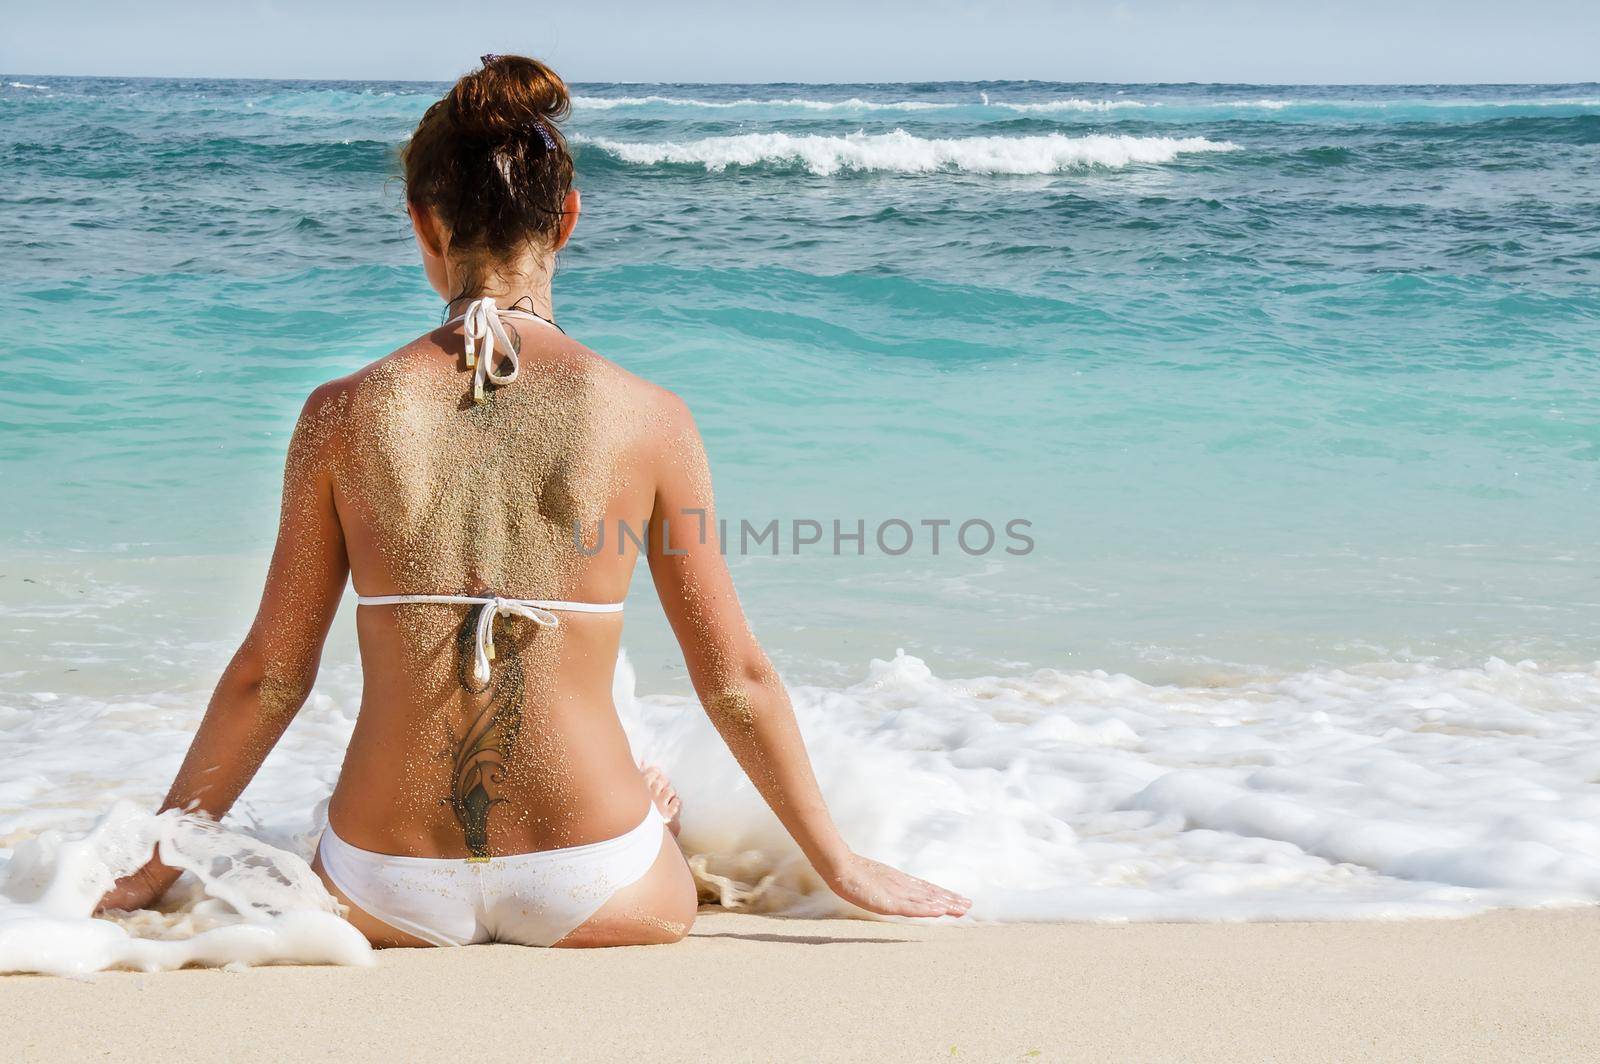 A woman with a sun hat is sitting on the beach Bali. Stock image.